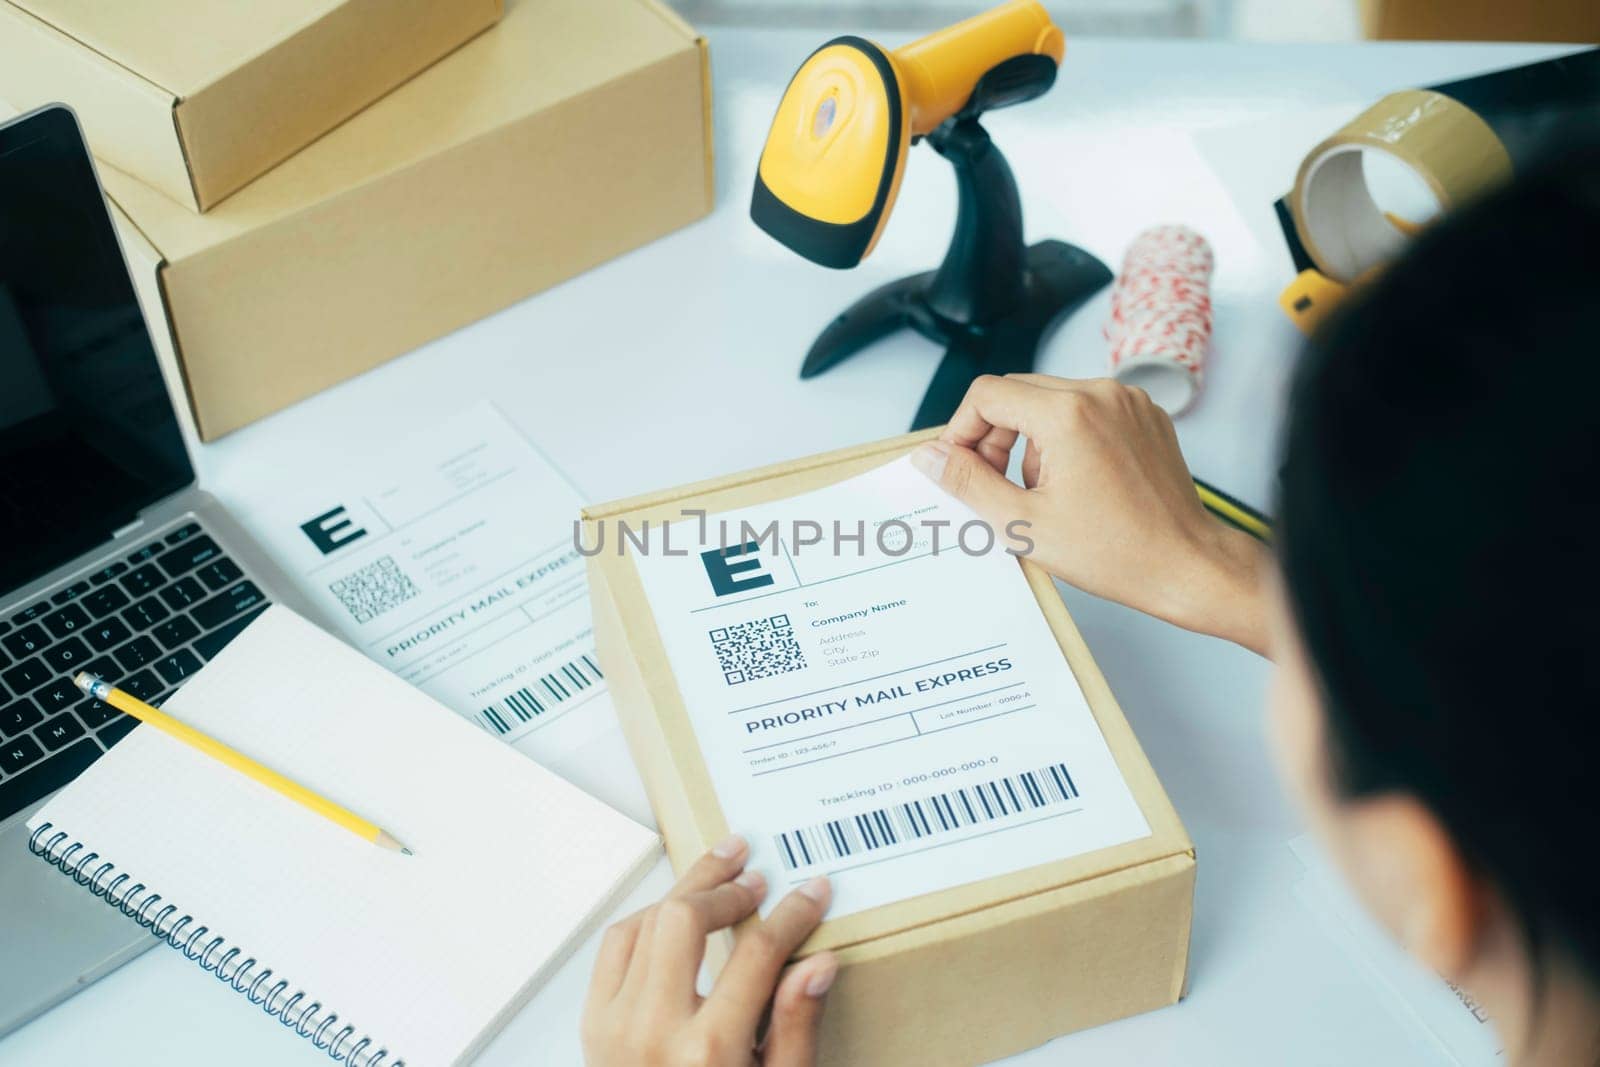 Close up of young female online business owner sitting at desk with laptop and boxes and putting shipping label on cardboard boxes or parcel of customer's order preparing for shipment and delivery.